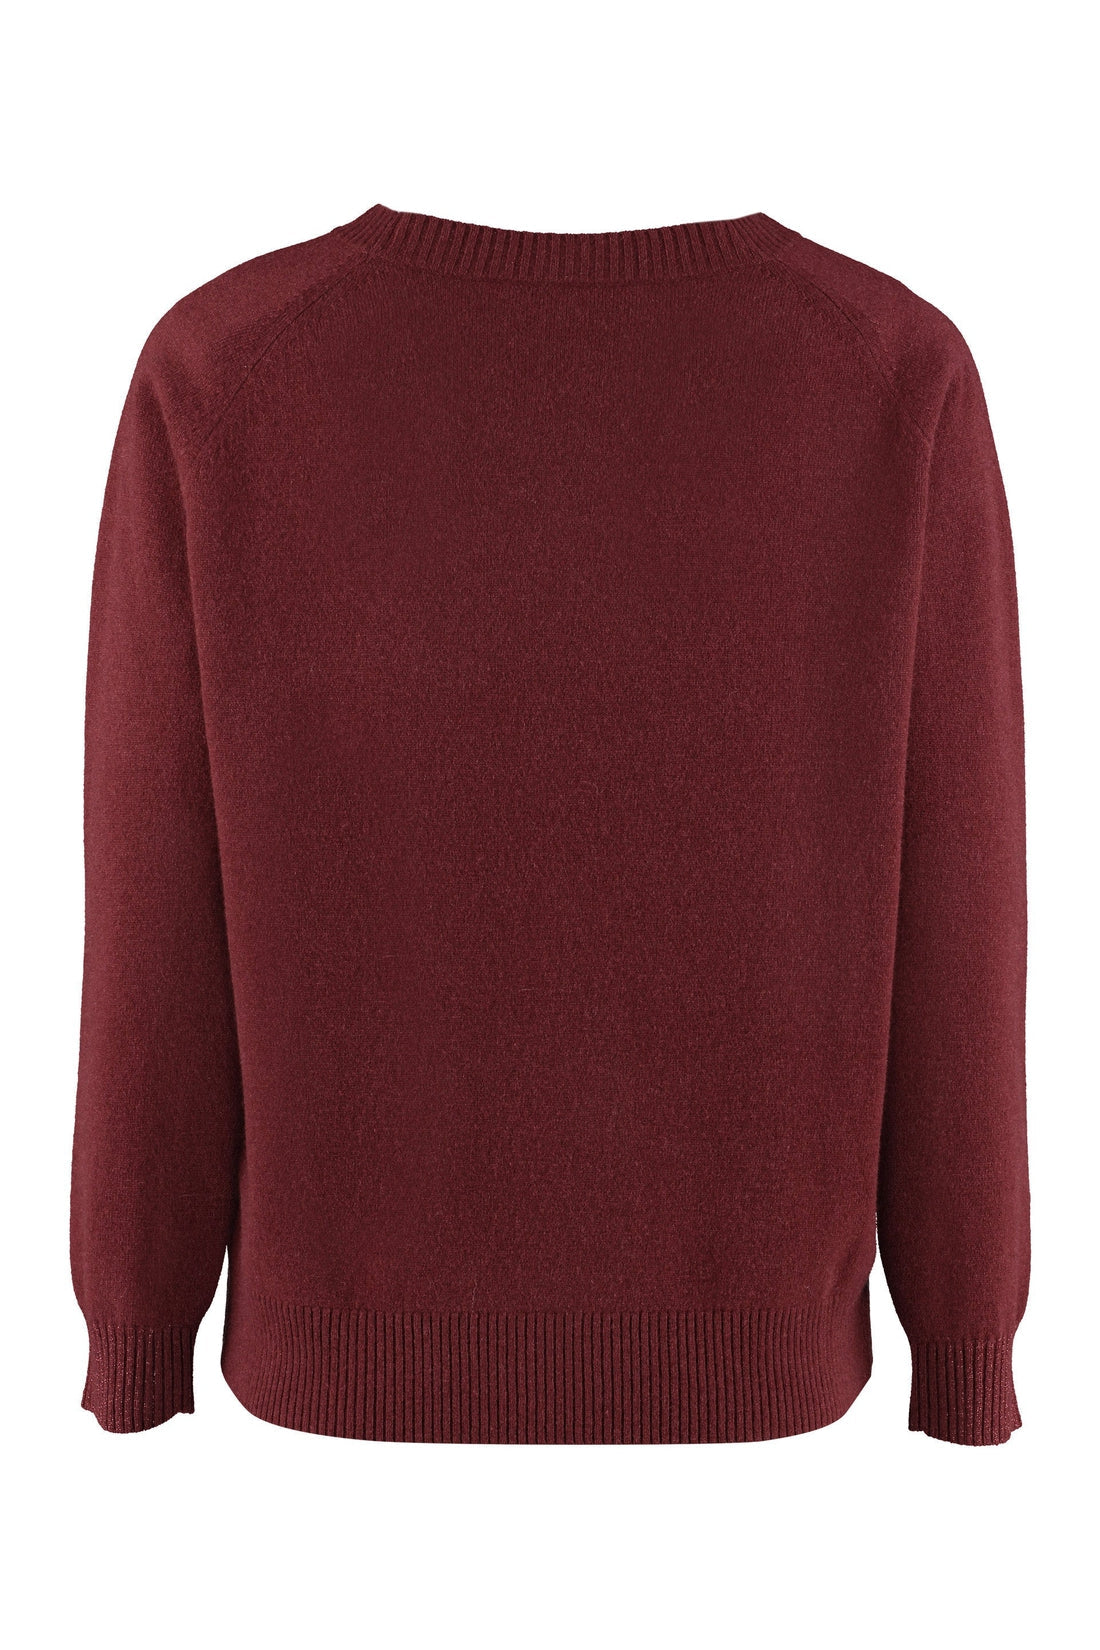 Max Mara Studio-OUTLET-SALE-Alacre wool and cashmere sweater-ARCHIVIST